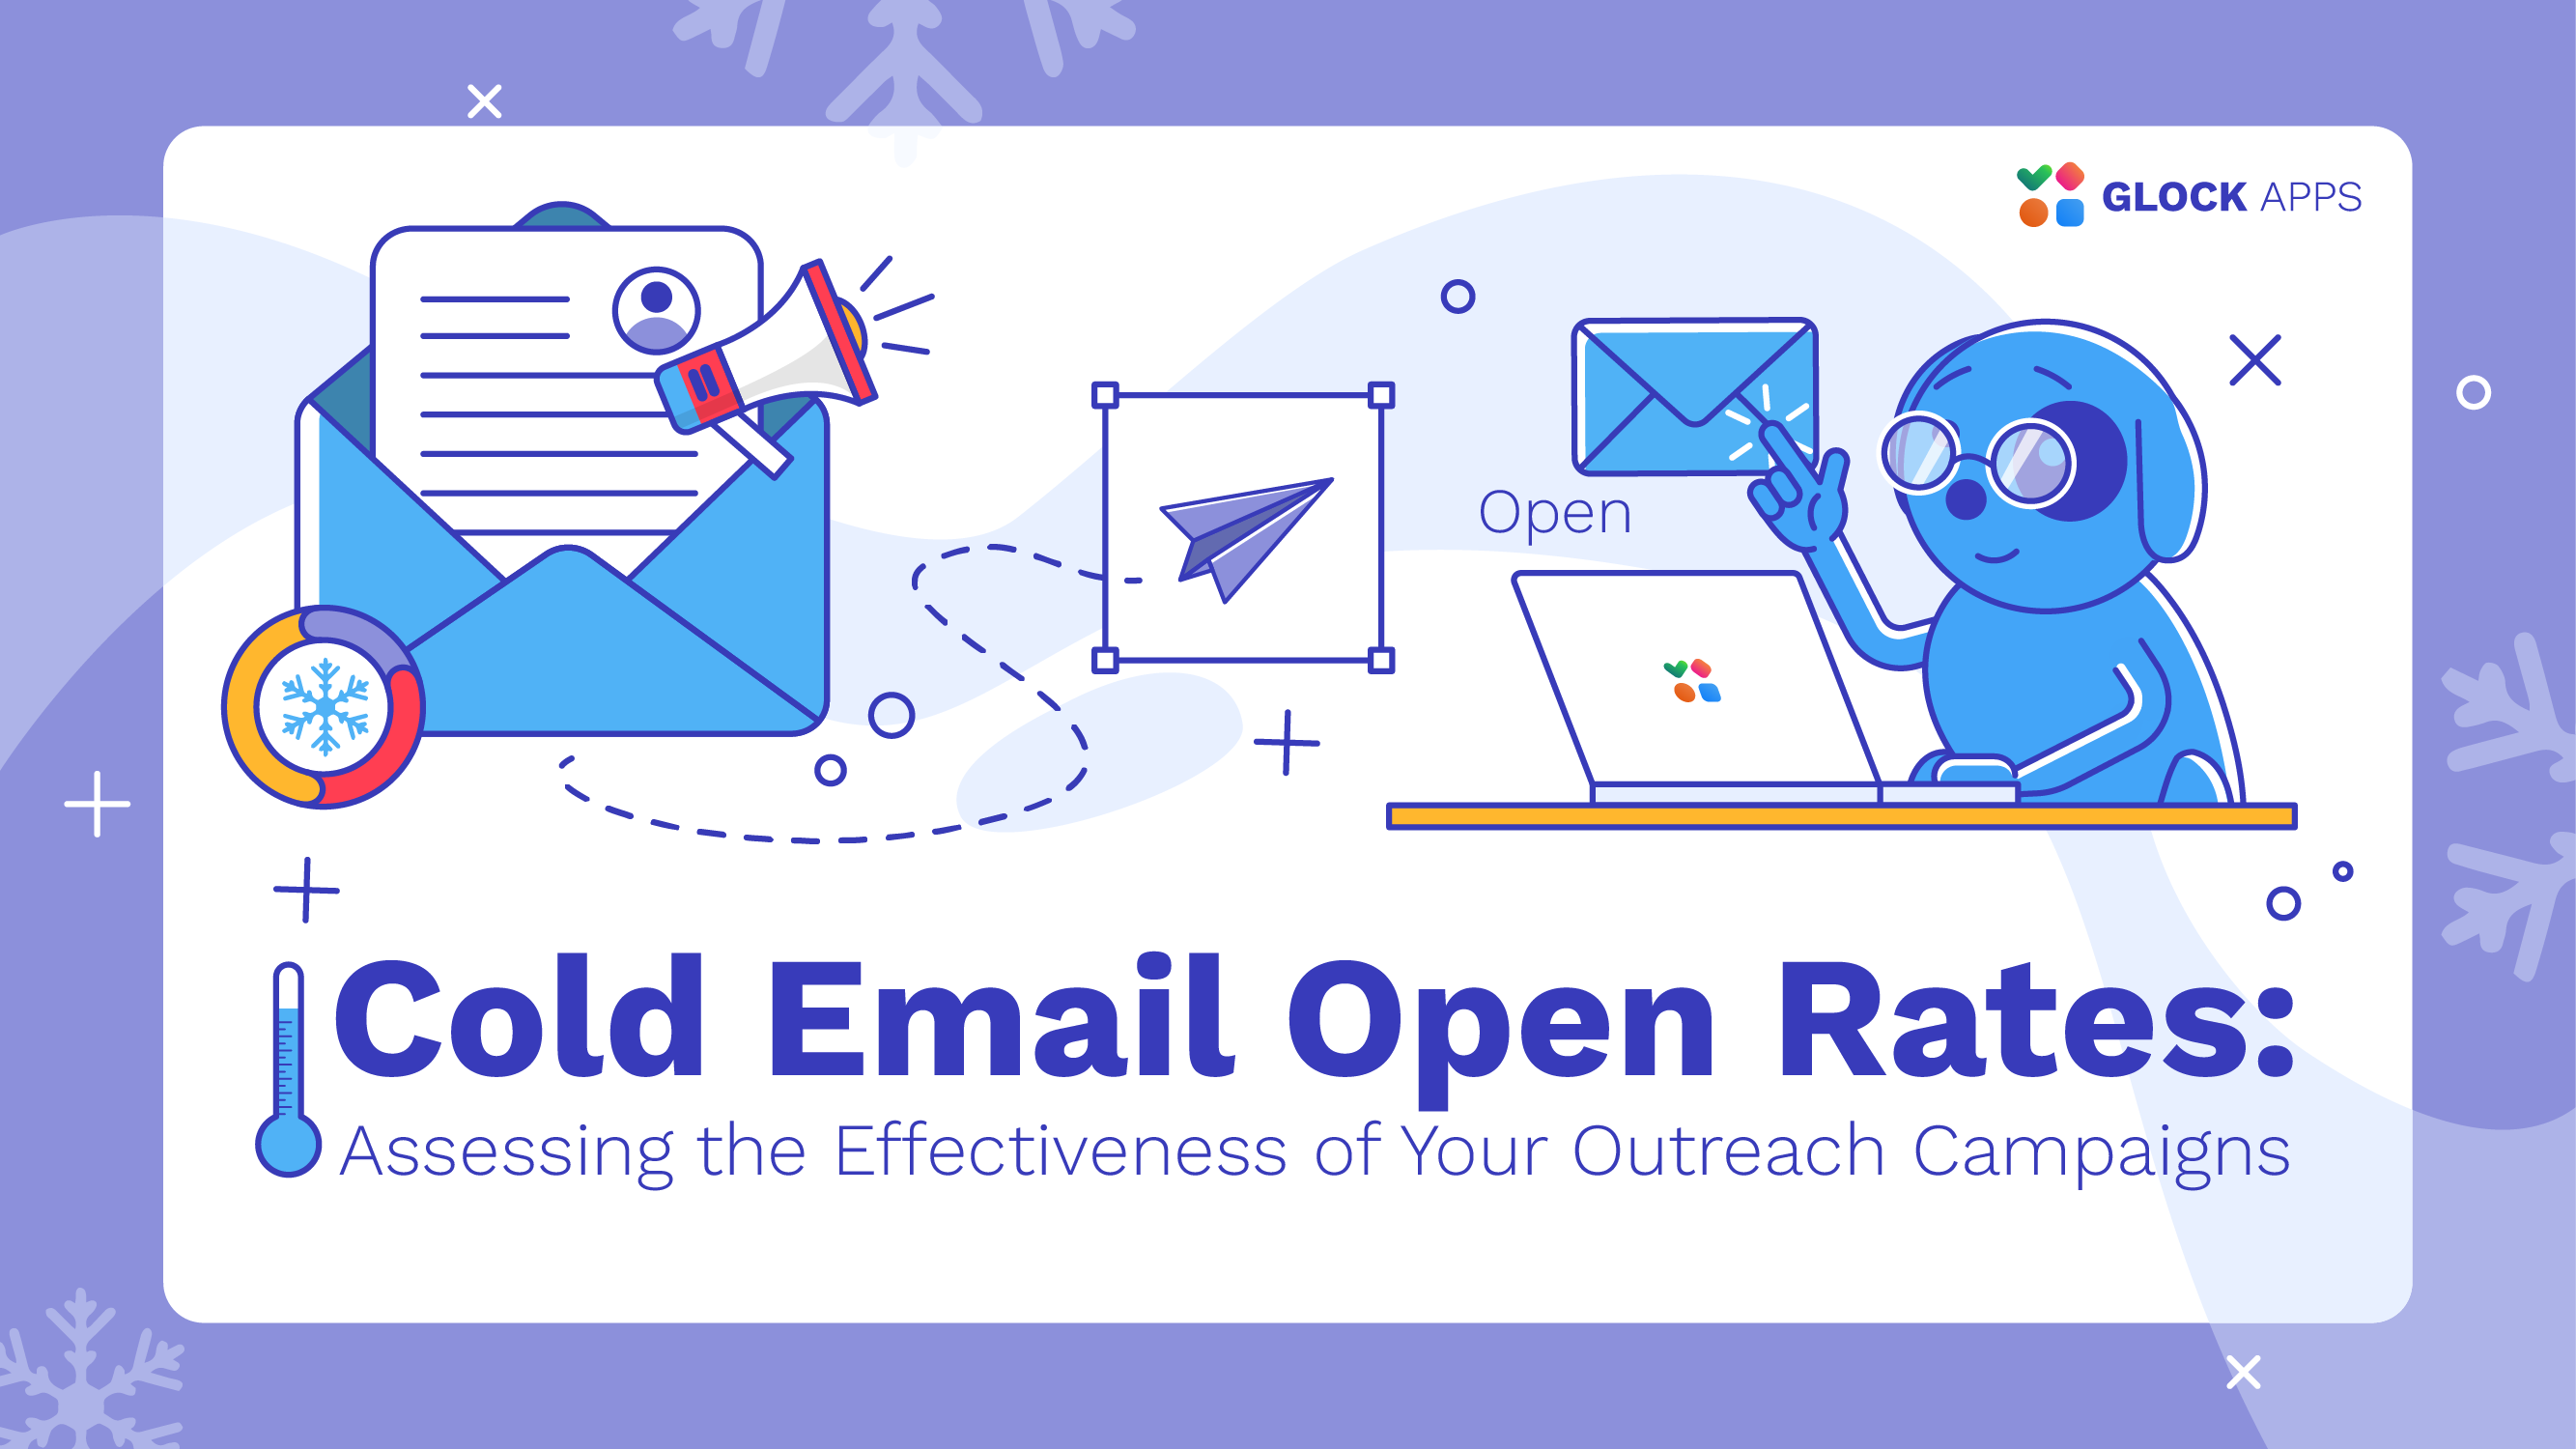 glockapps:-cold-email-open-rates:-assessing-the-effectiveness-of-your-outreach-campaigns